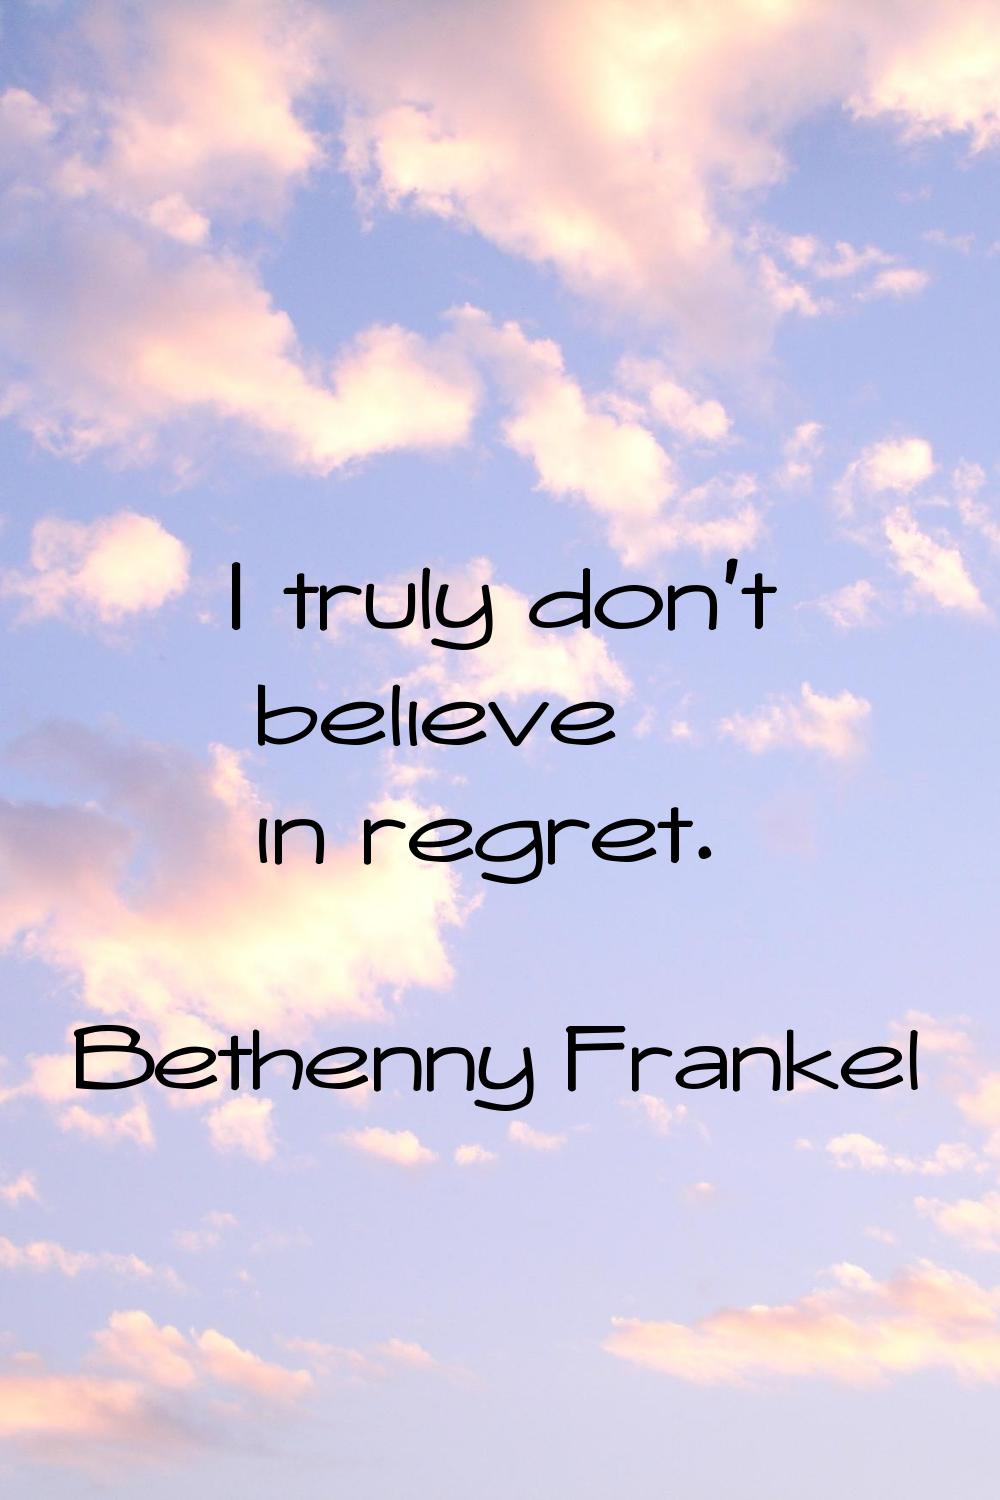 I truly don't believe in regret.